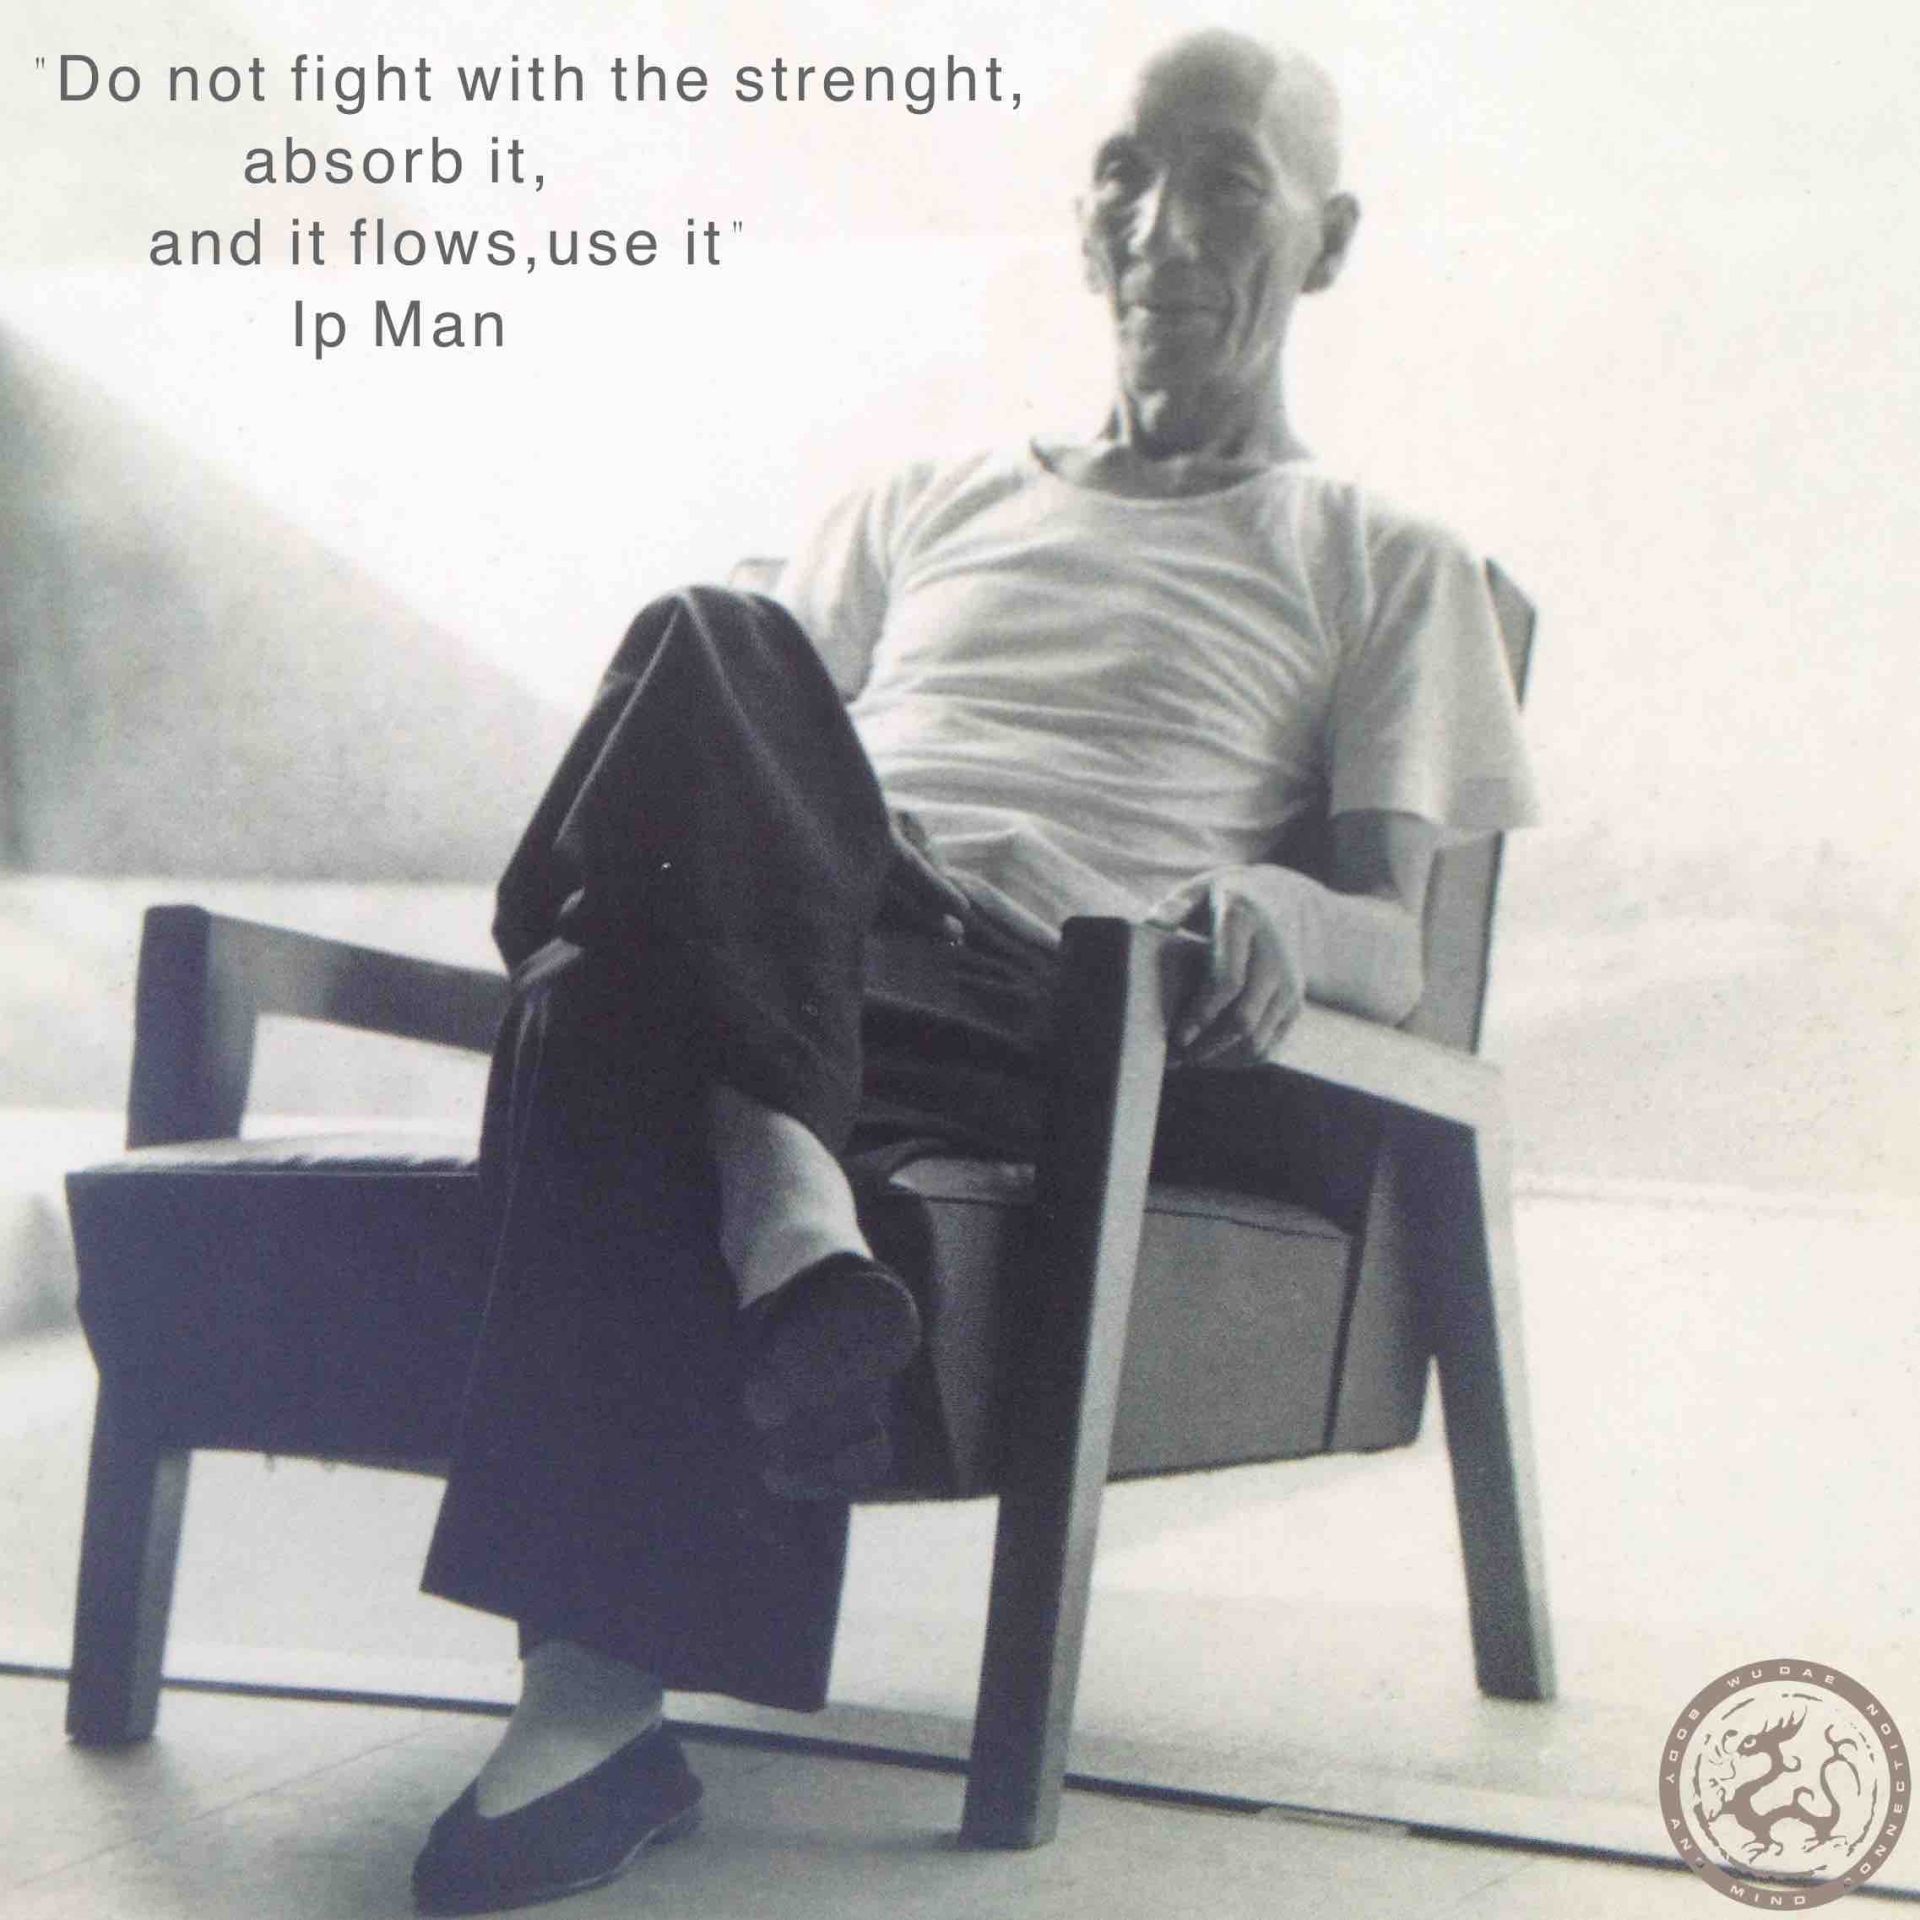 A quote from Wing Chun grandmaster Ip Man